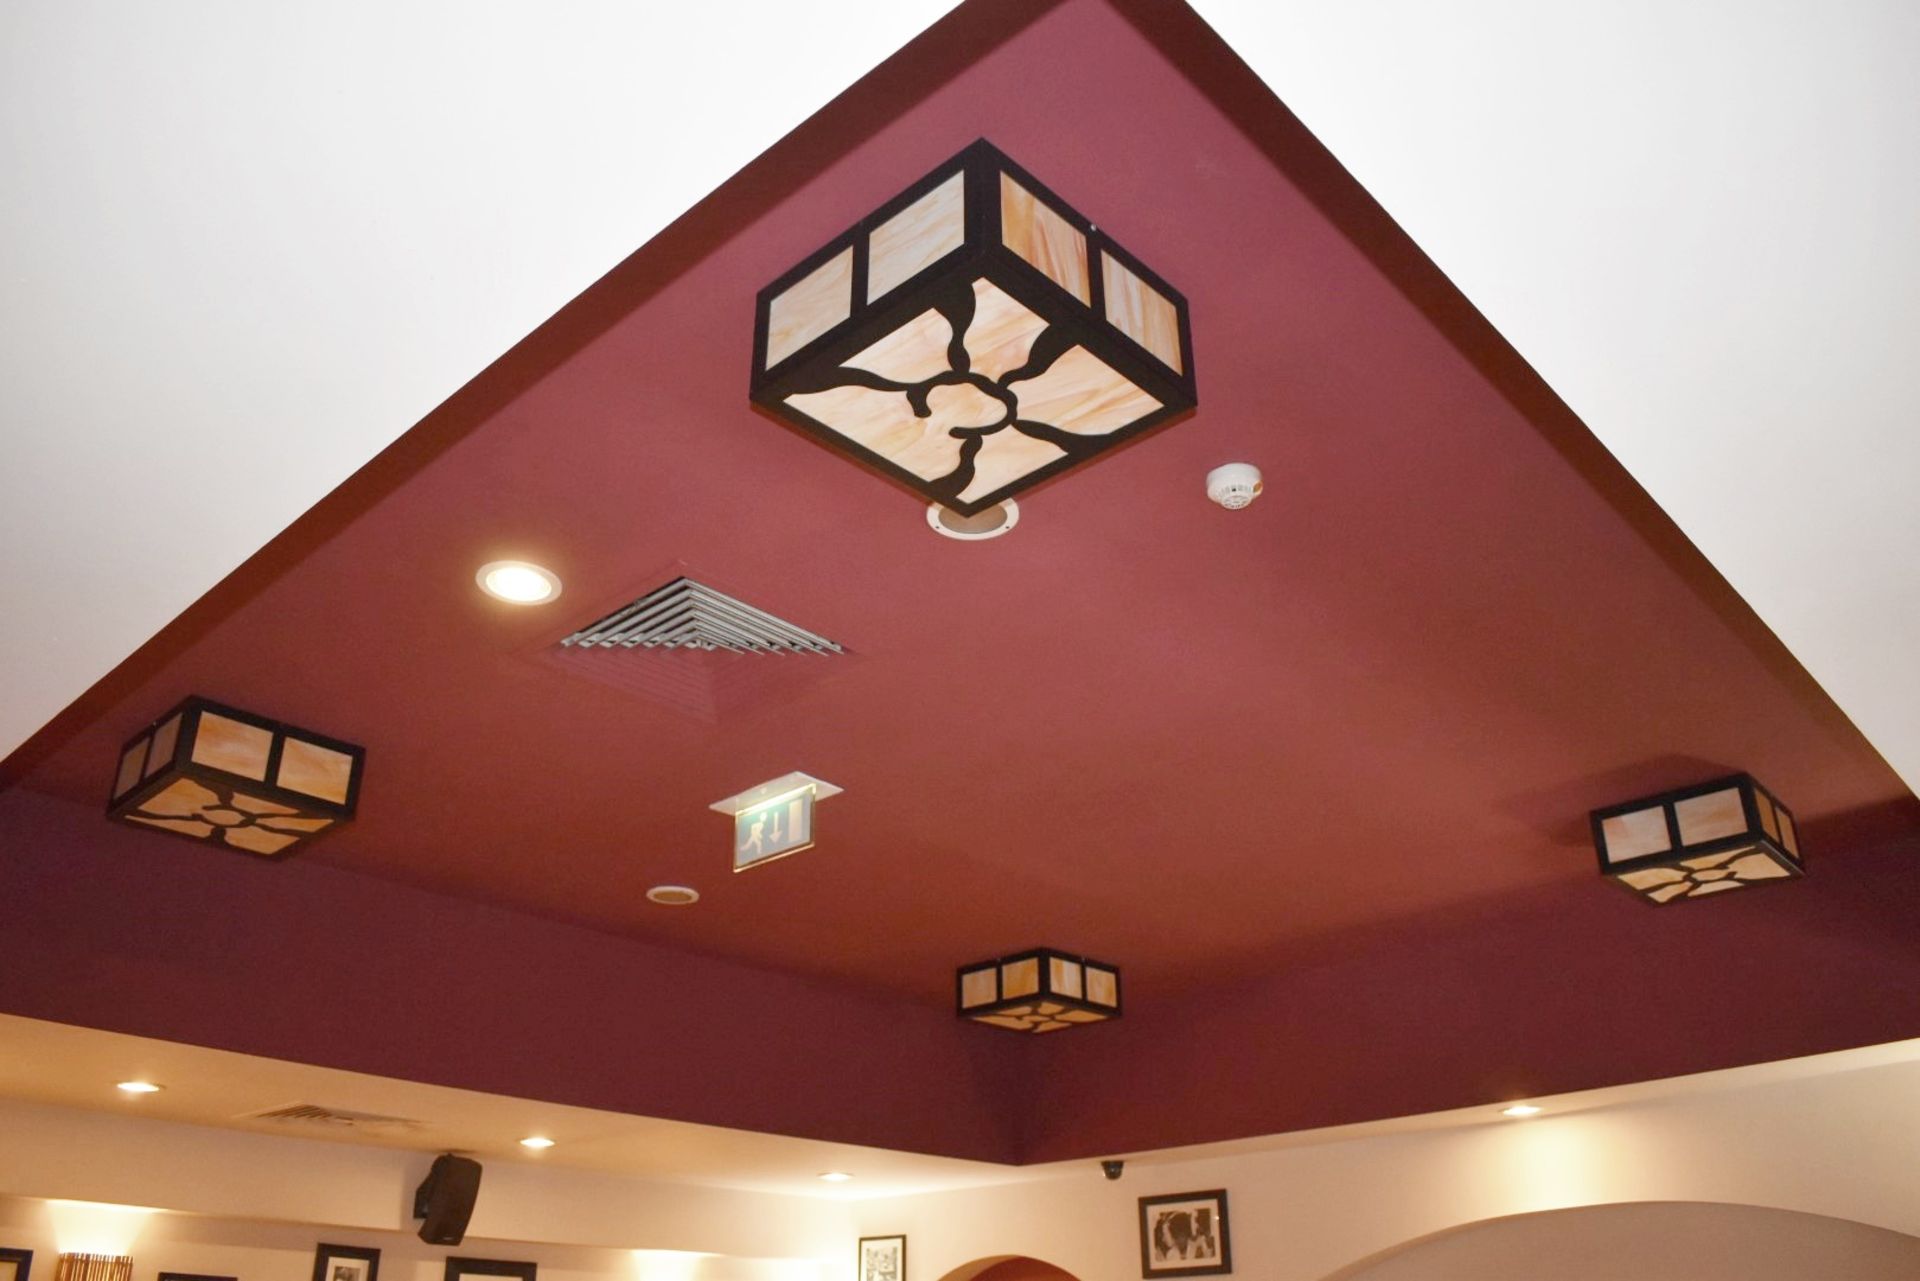 4 x Large Square Ceiling Lights With Artisan Glass Shades - Image 4 of 4